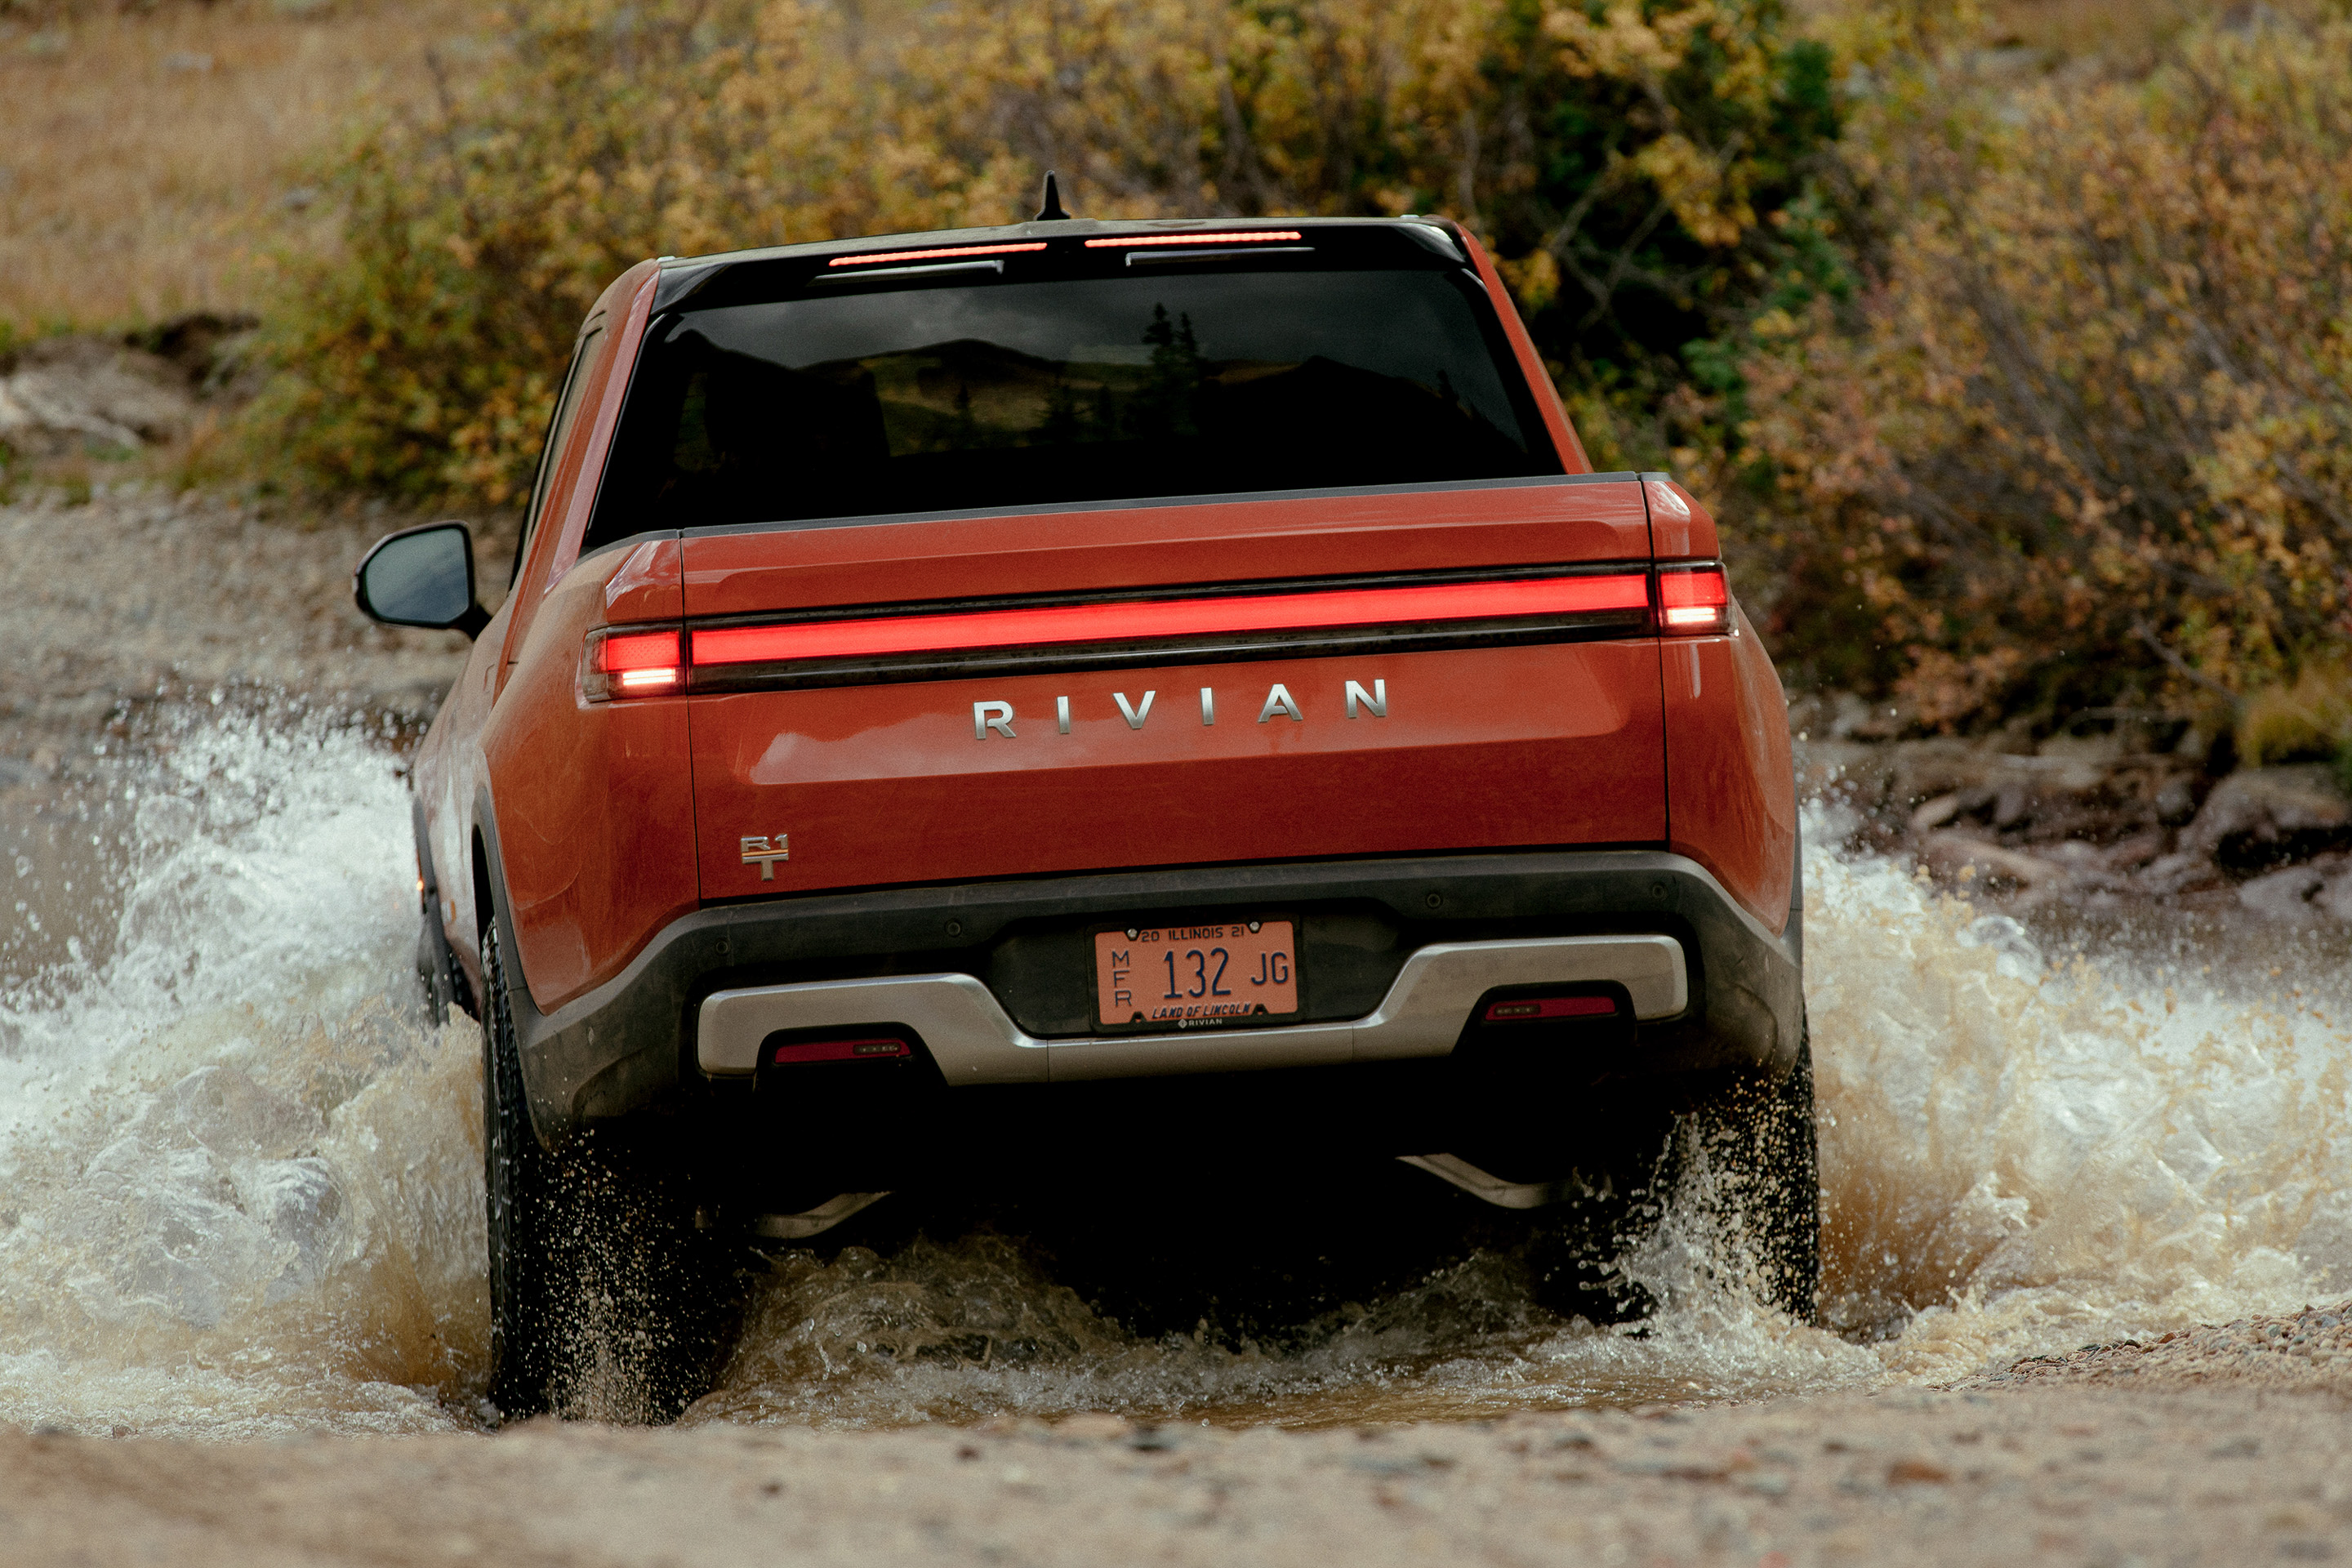   
																Where Will Rivian Be in 5 Years? 
															 